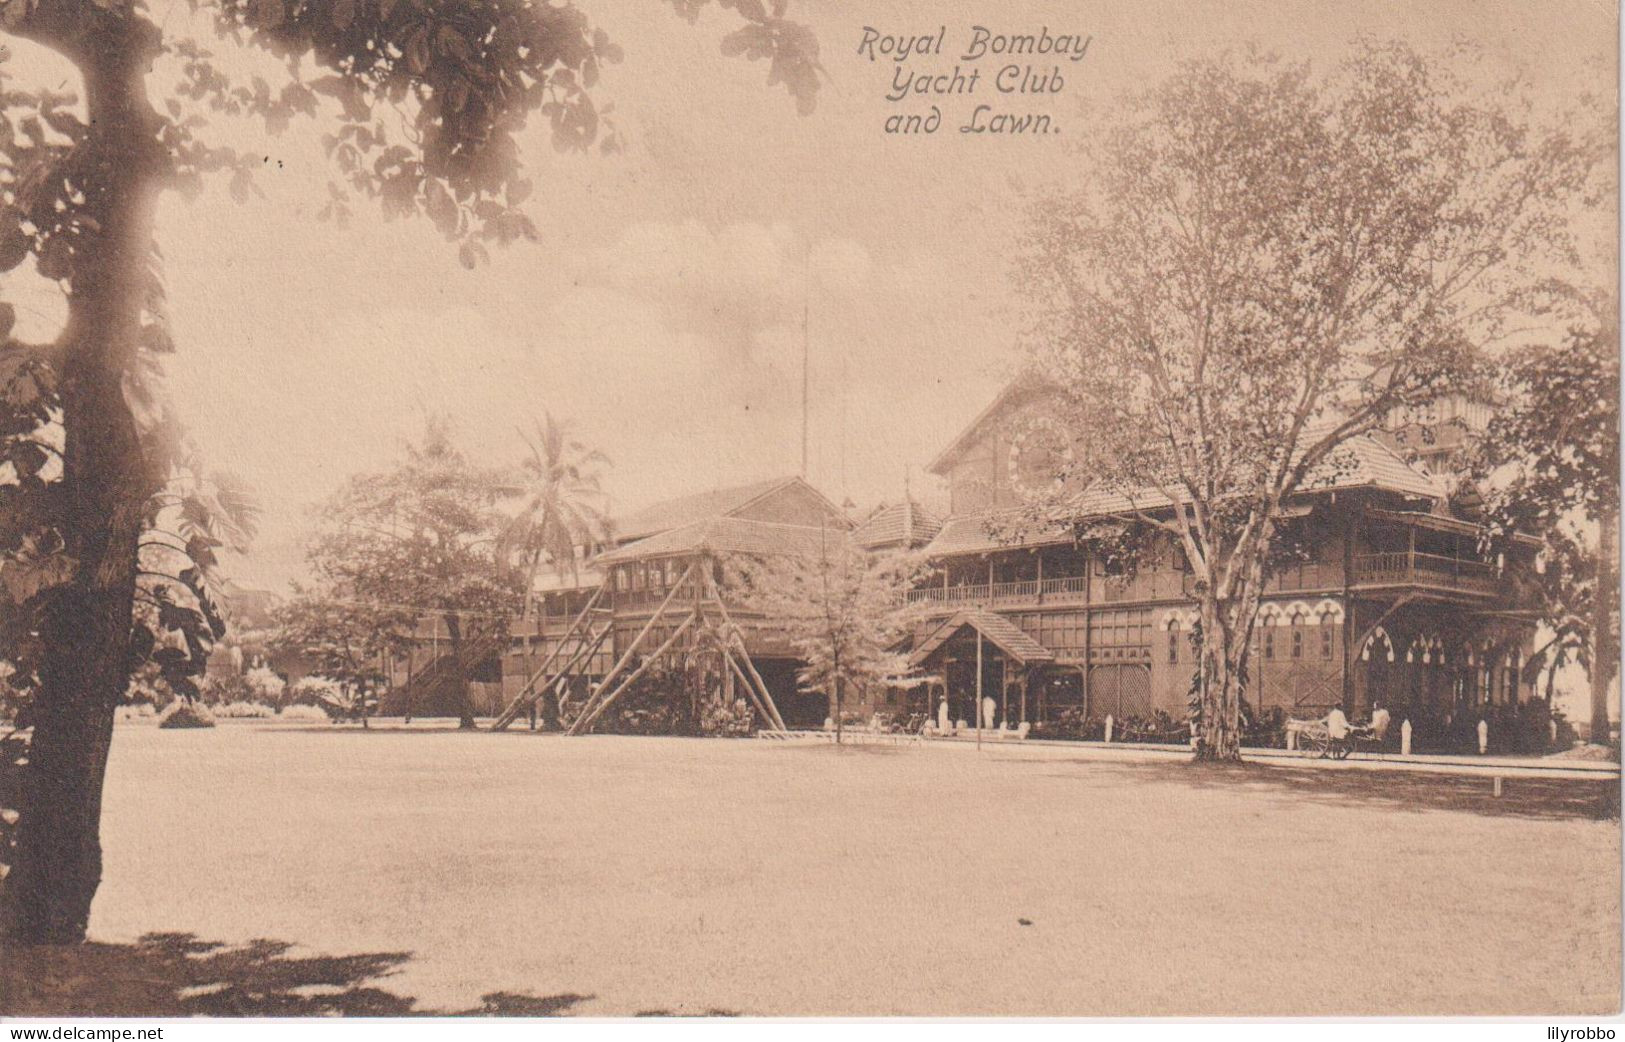 INDIA - Royal Yacht Club And Lawn BOMBAY - Indien